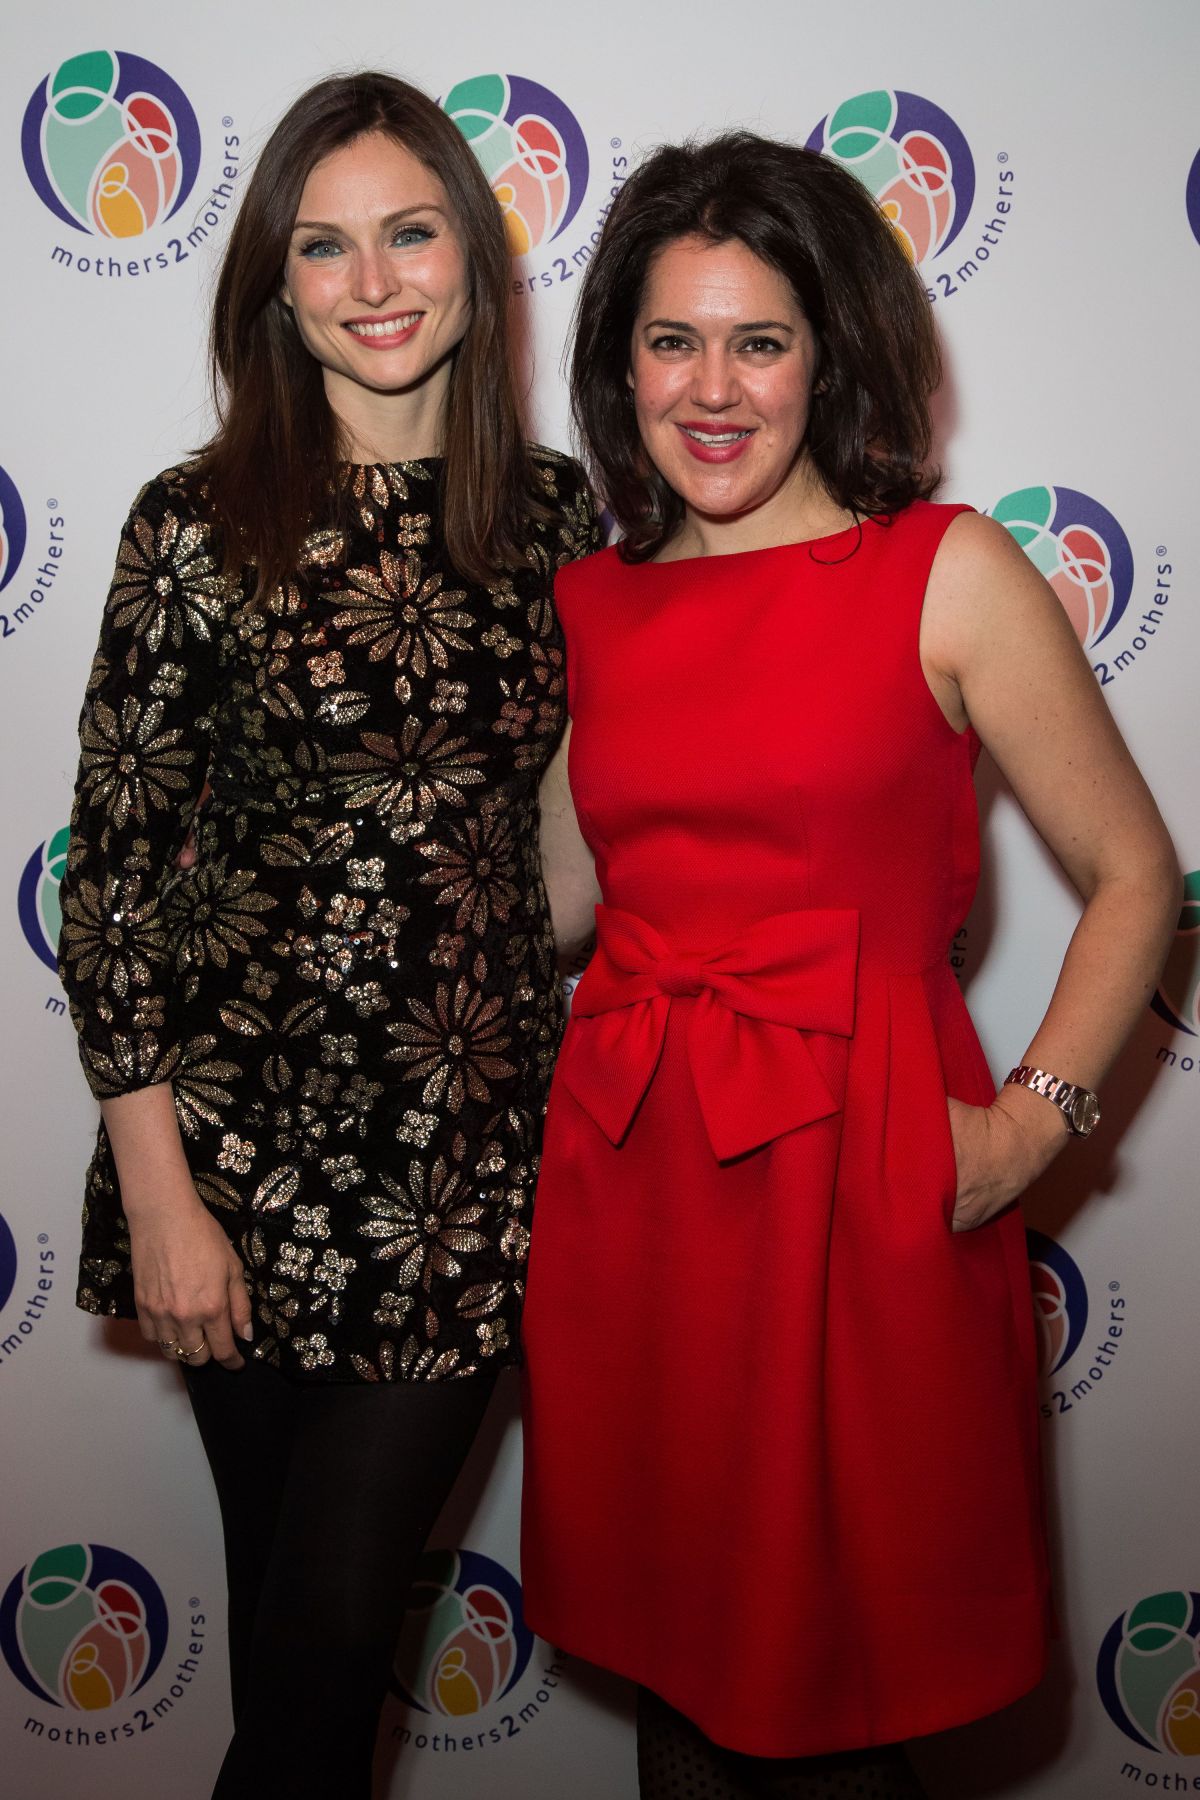 SOPHIE ELLIS-BEXTOR at mothers2mothers Womder Woman Celebration in ...